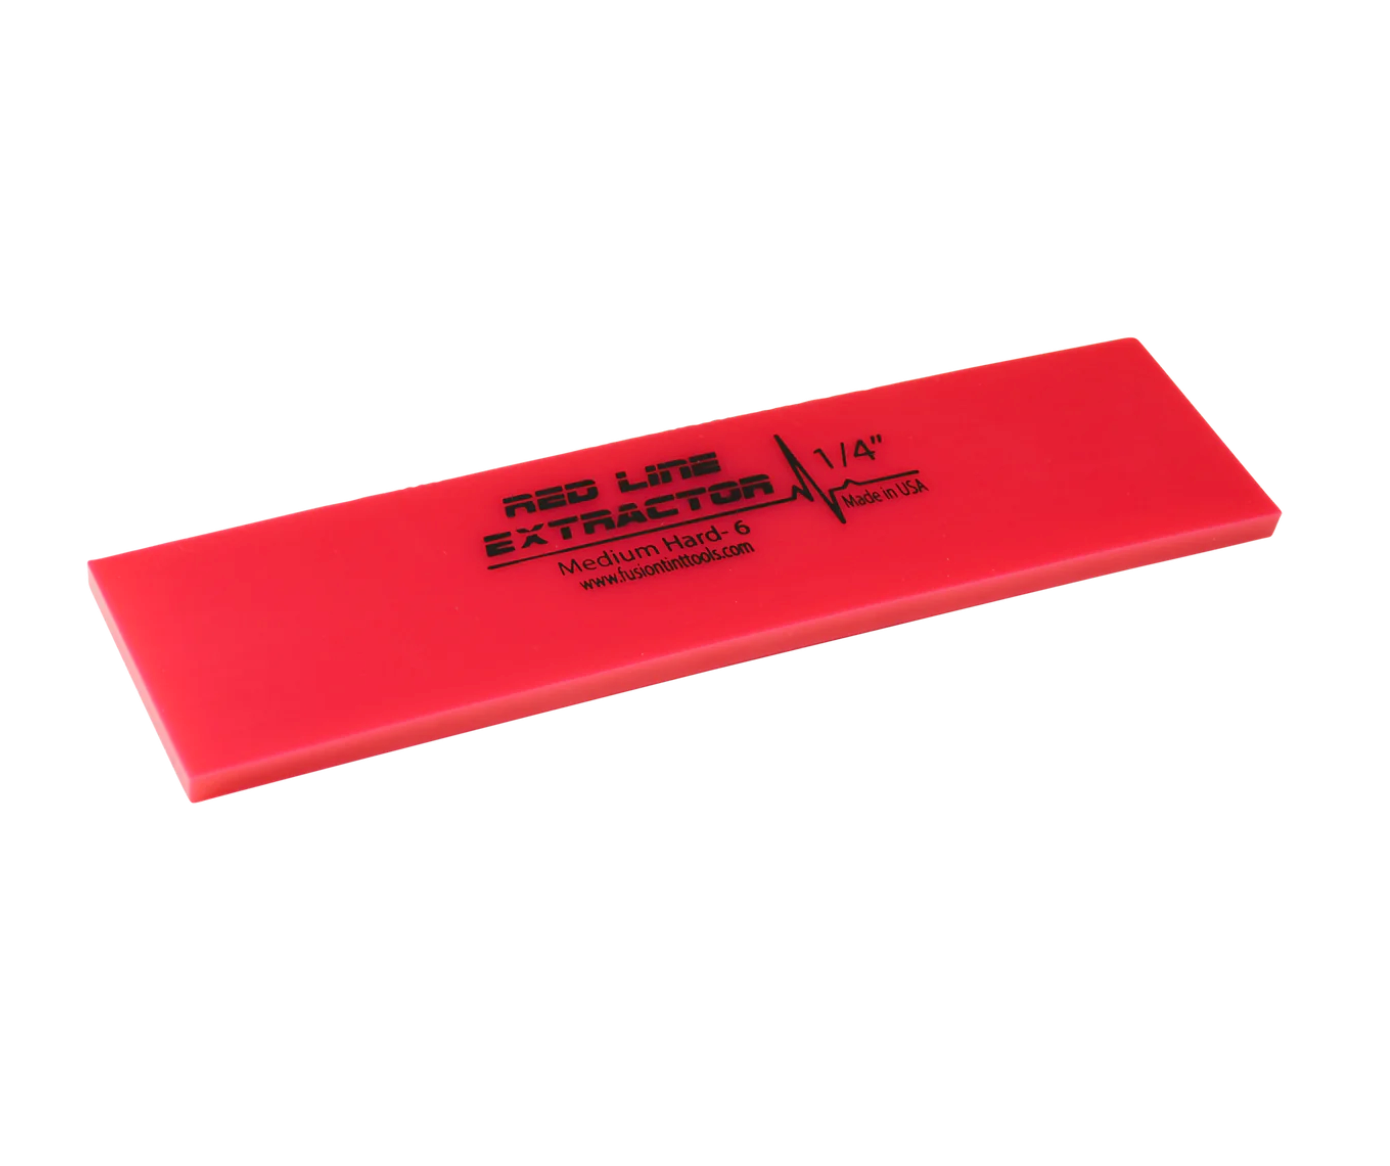 8" Red Line Extractor Squeegee Blade with double bevel by Fusion Tools